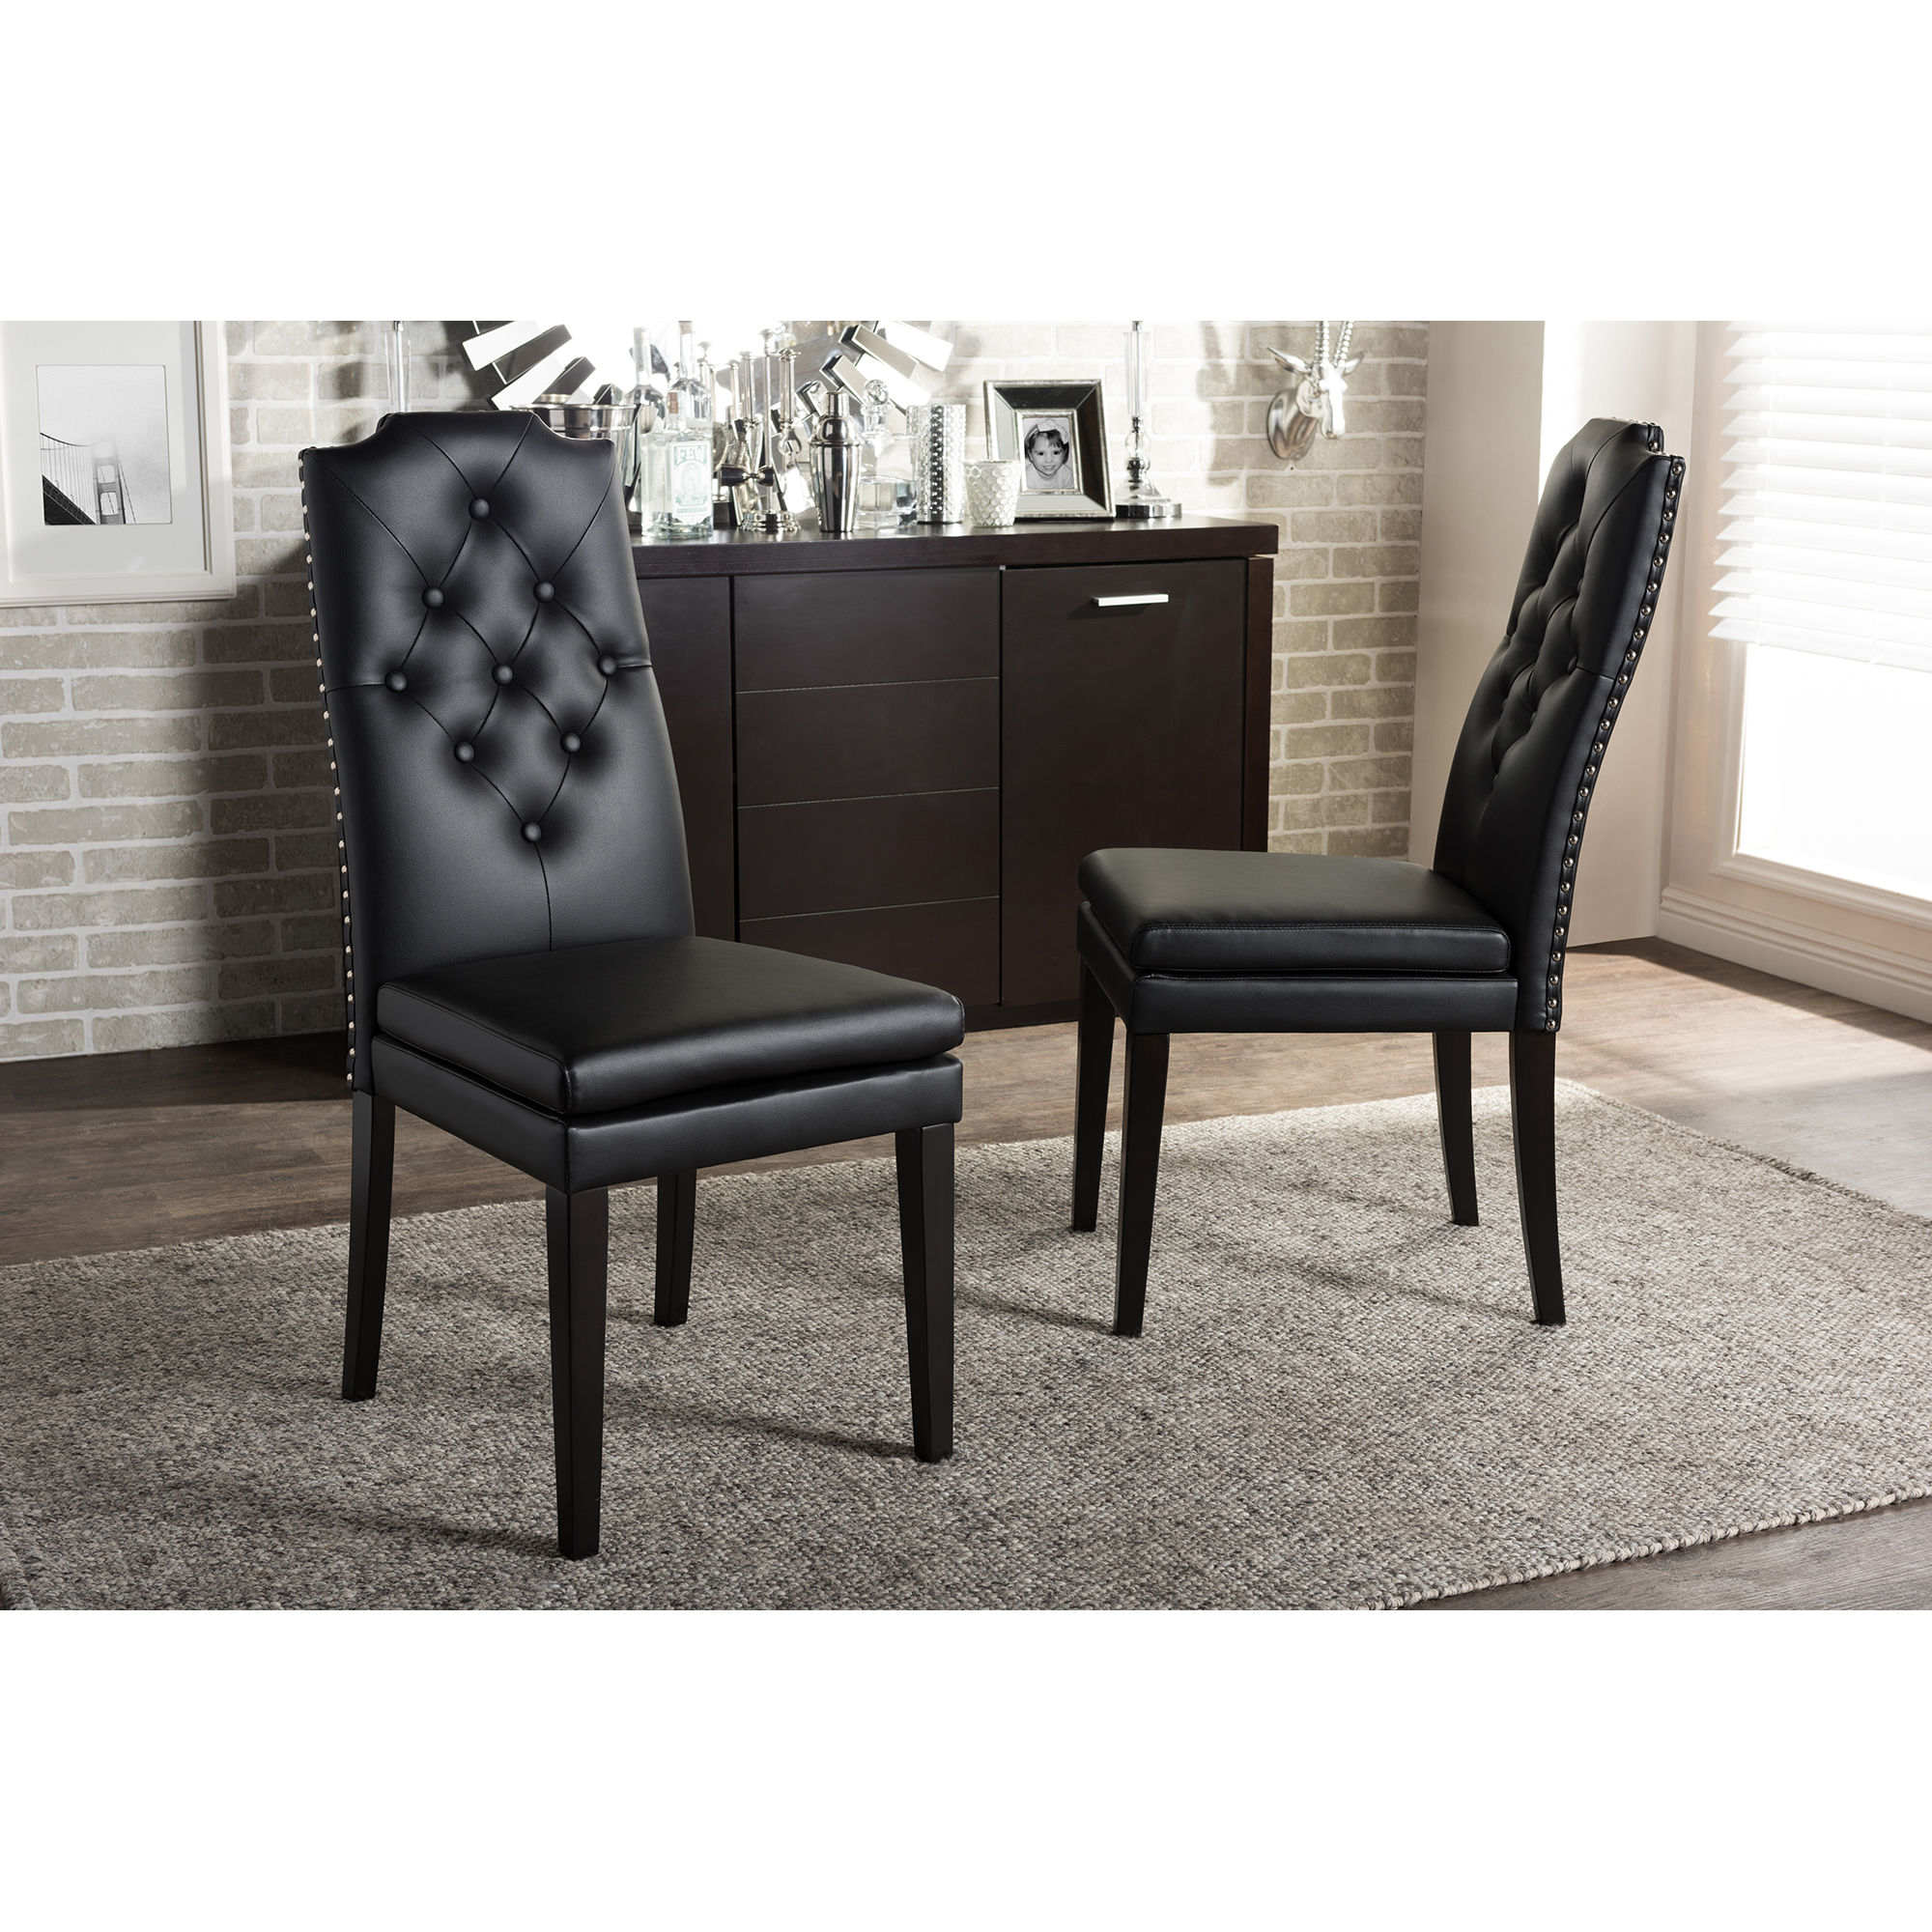 Baxton Studio Dylin Modern and Contemporary Black Faux Leather Button-Tufted Nail heads Trim Dining Chair Affordable modern furniture in Chicago, Classic Dining Chair, Modern Chair, cheap Chair,